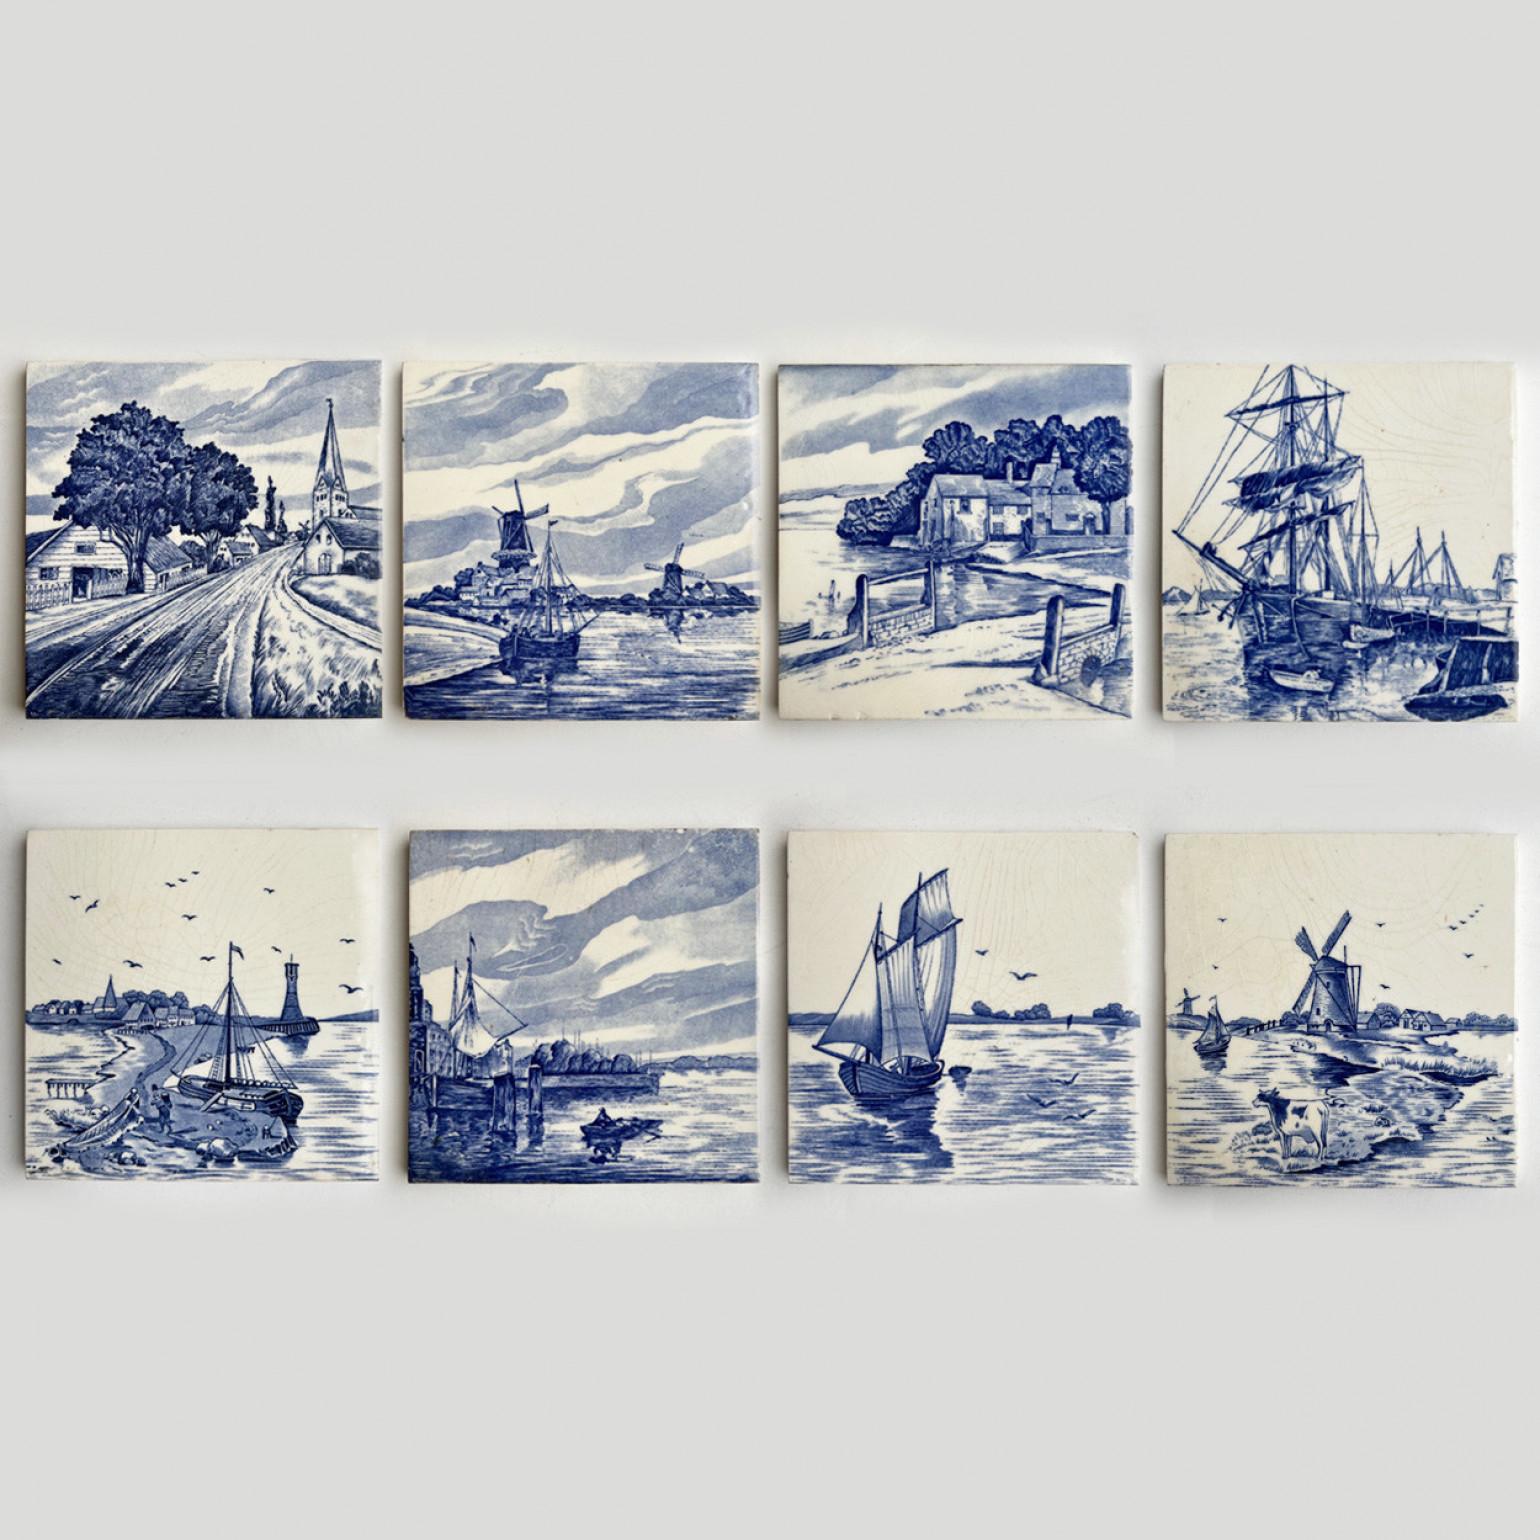 Handmade tiles in beautiful blue colors that mix perfect together.
The tiles are manufactured around 1920 by Nord Deutsche Steingutfabrik AG, Germany.
These tiles would be charming displayed on easels, framed or incorporated into a custom tile